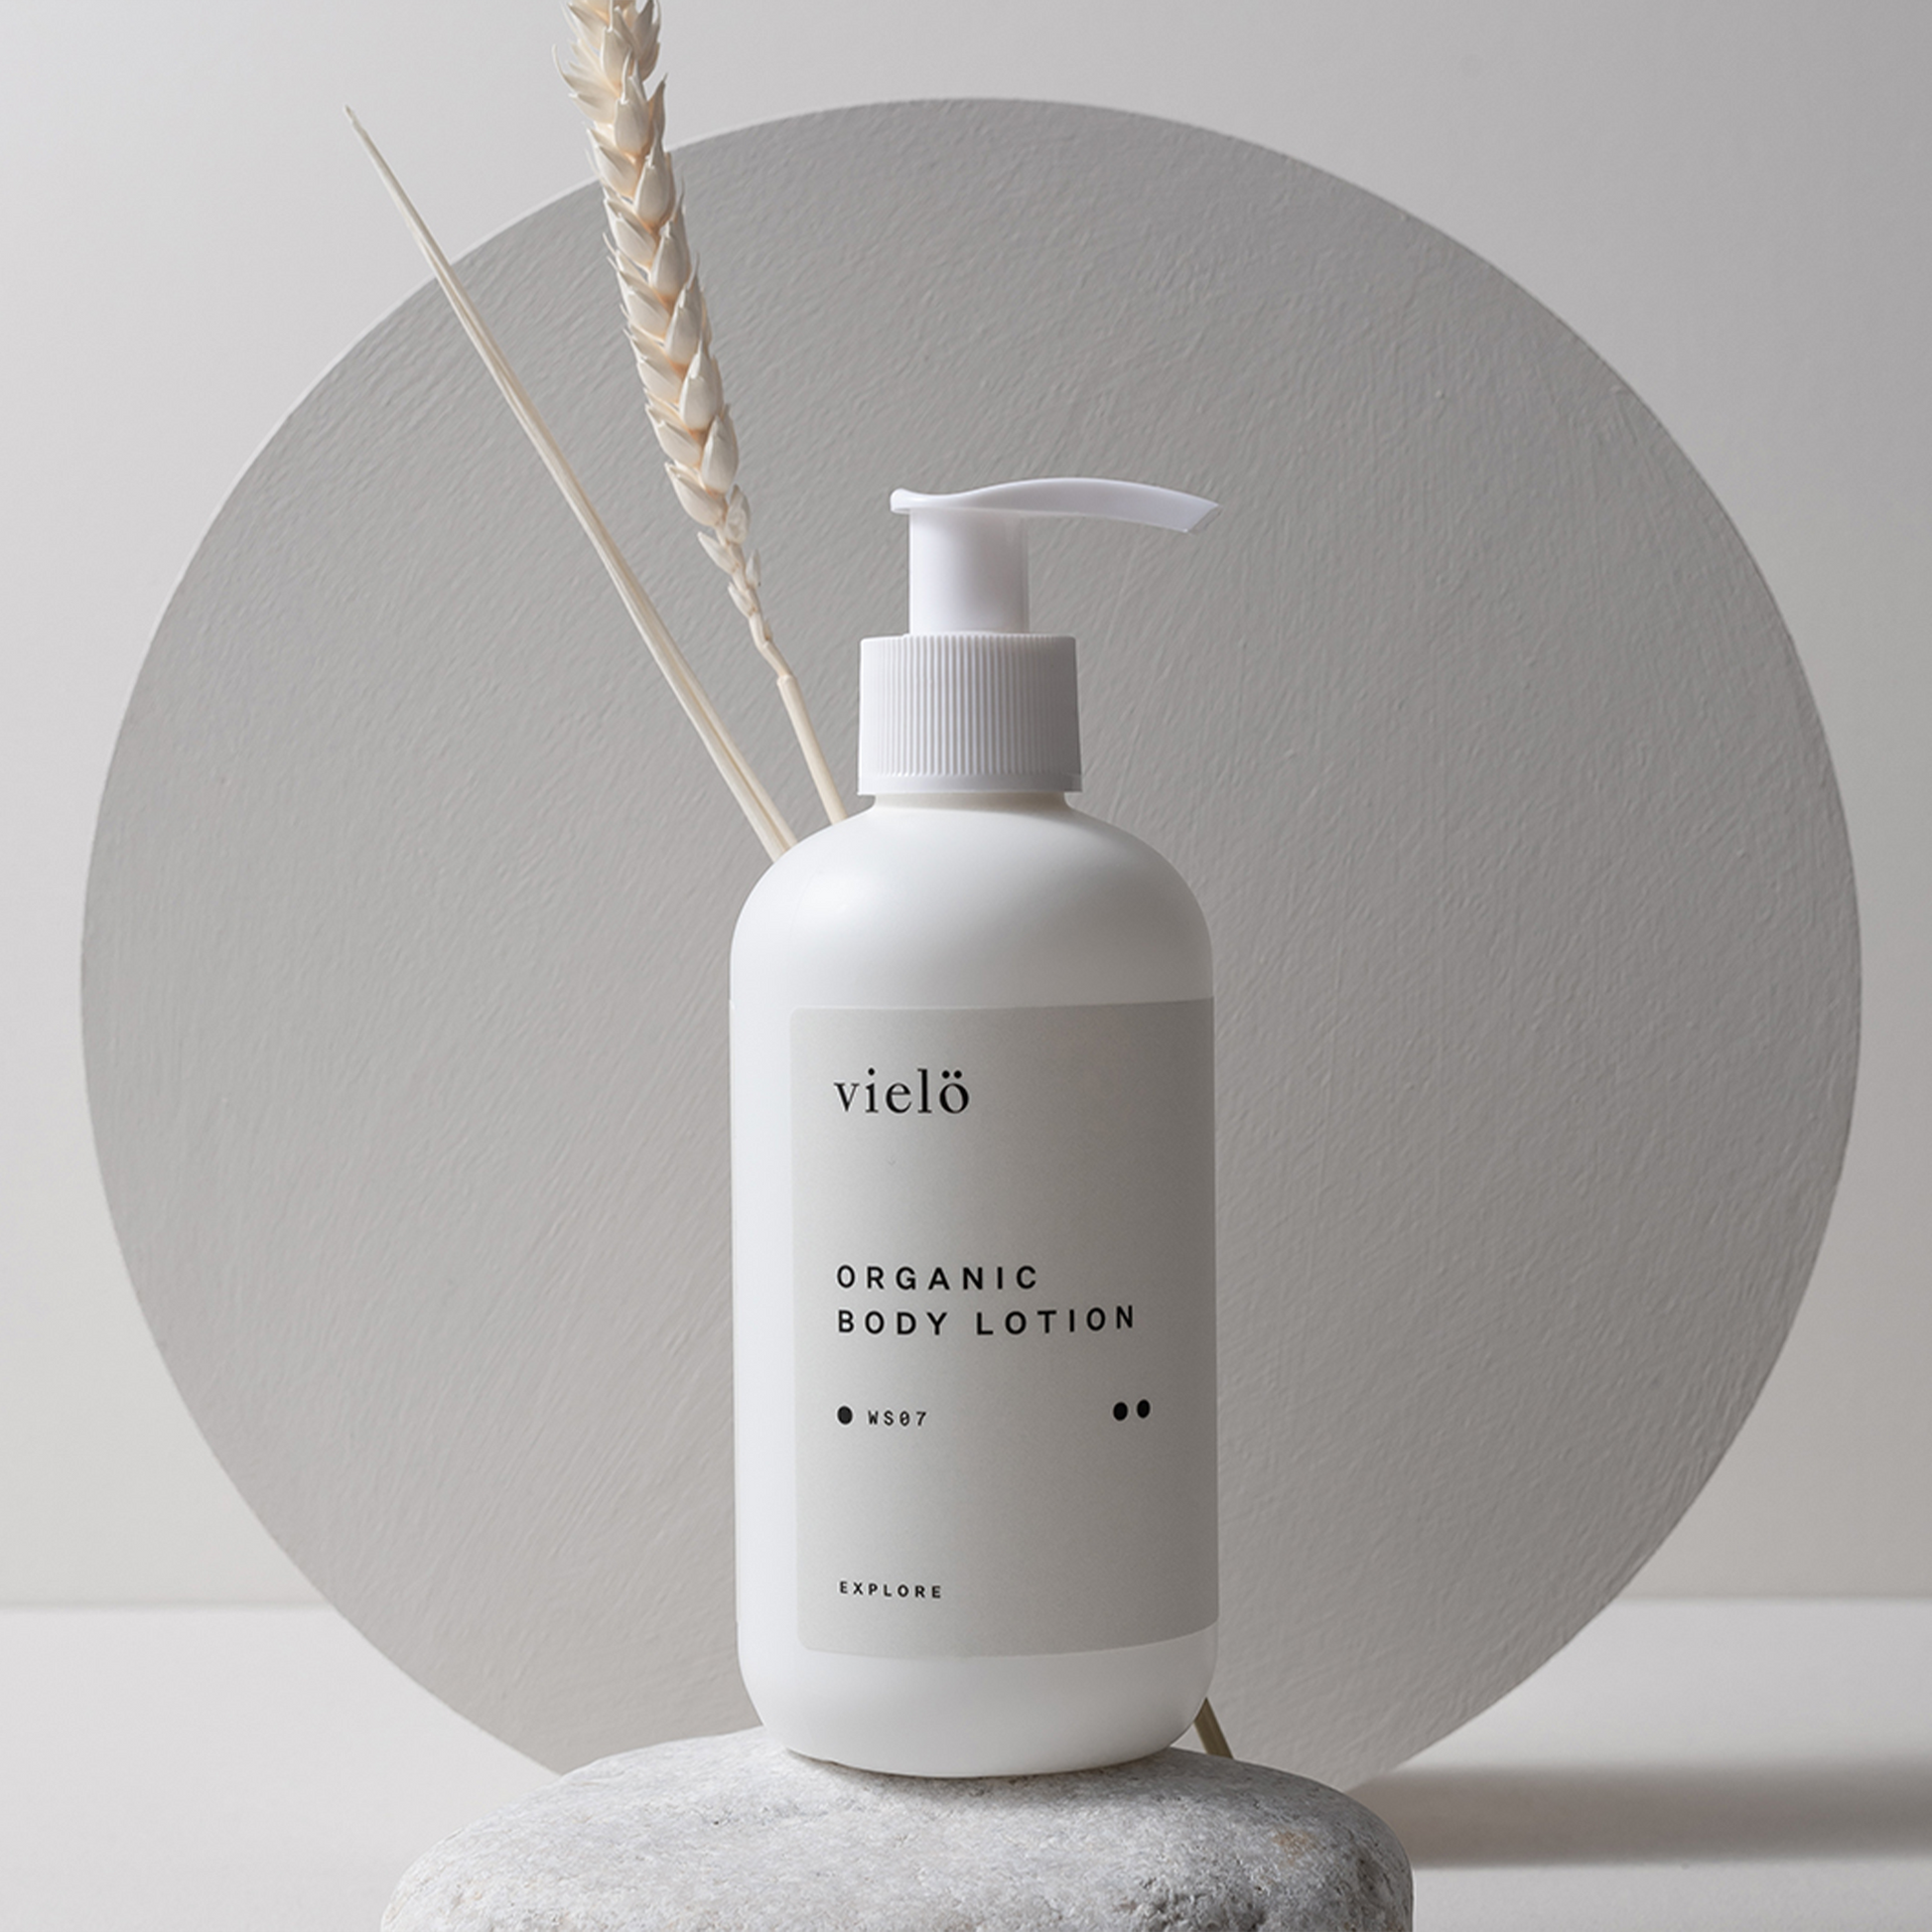 Vielo Organic Body Lotion: Nourishing organic body lotion, specially designed to moisturize and soften dry and sensitive skin. Suitable for all skin types.